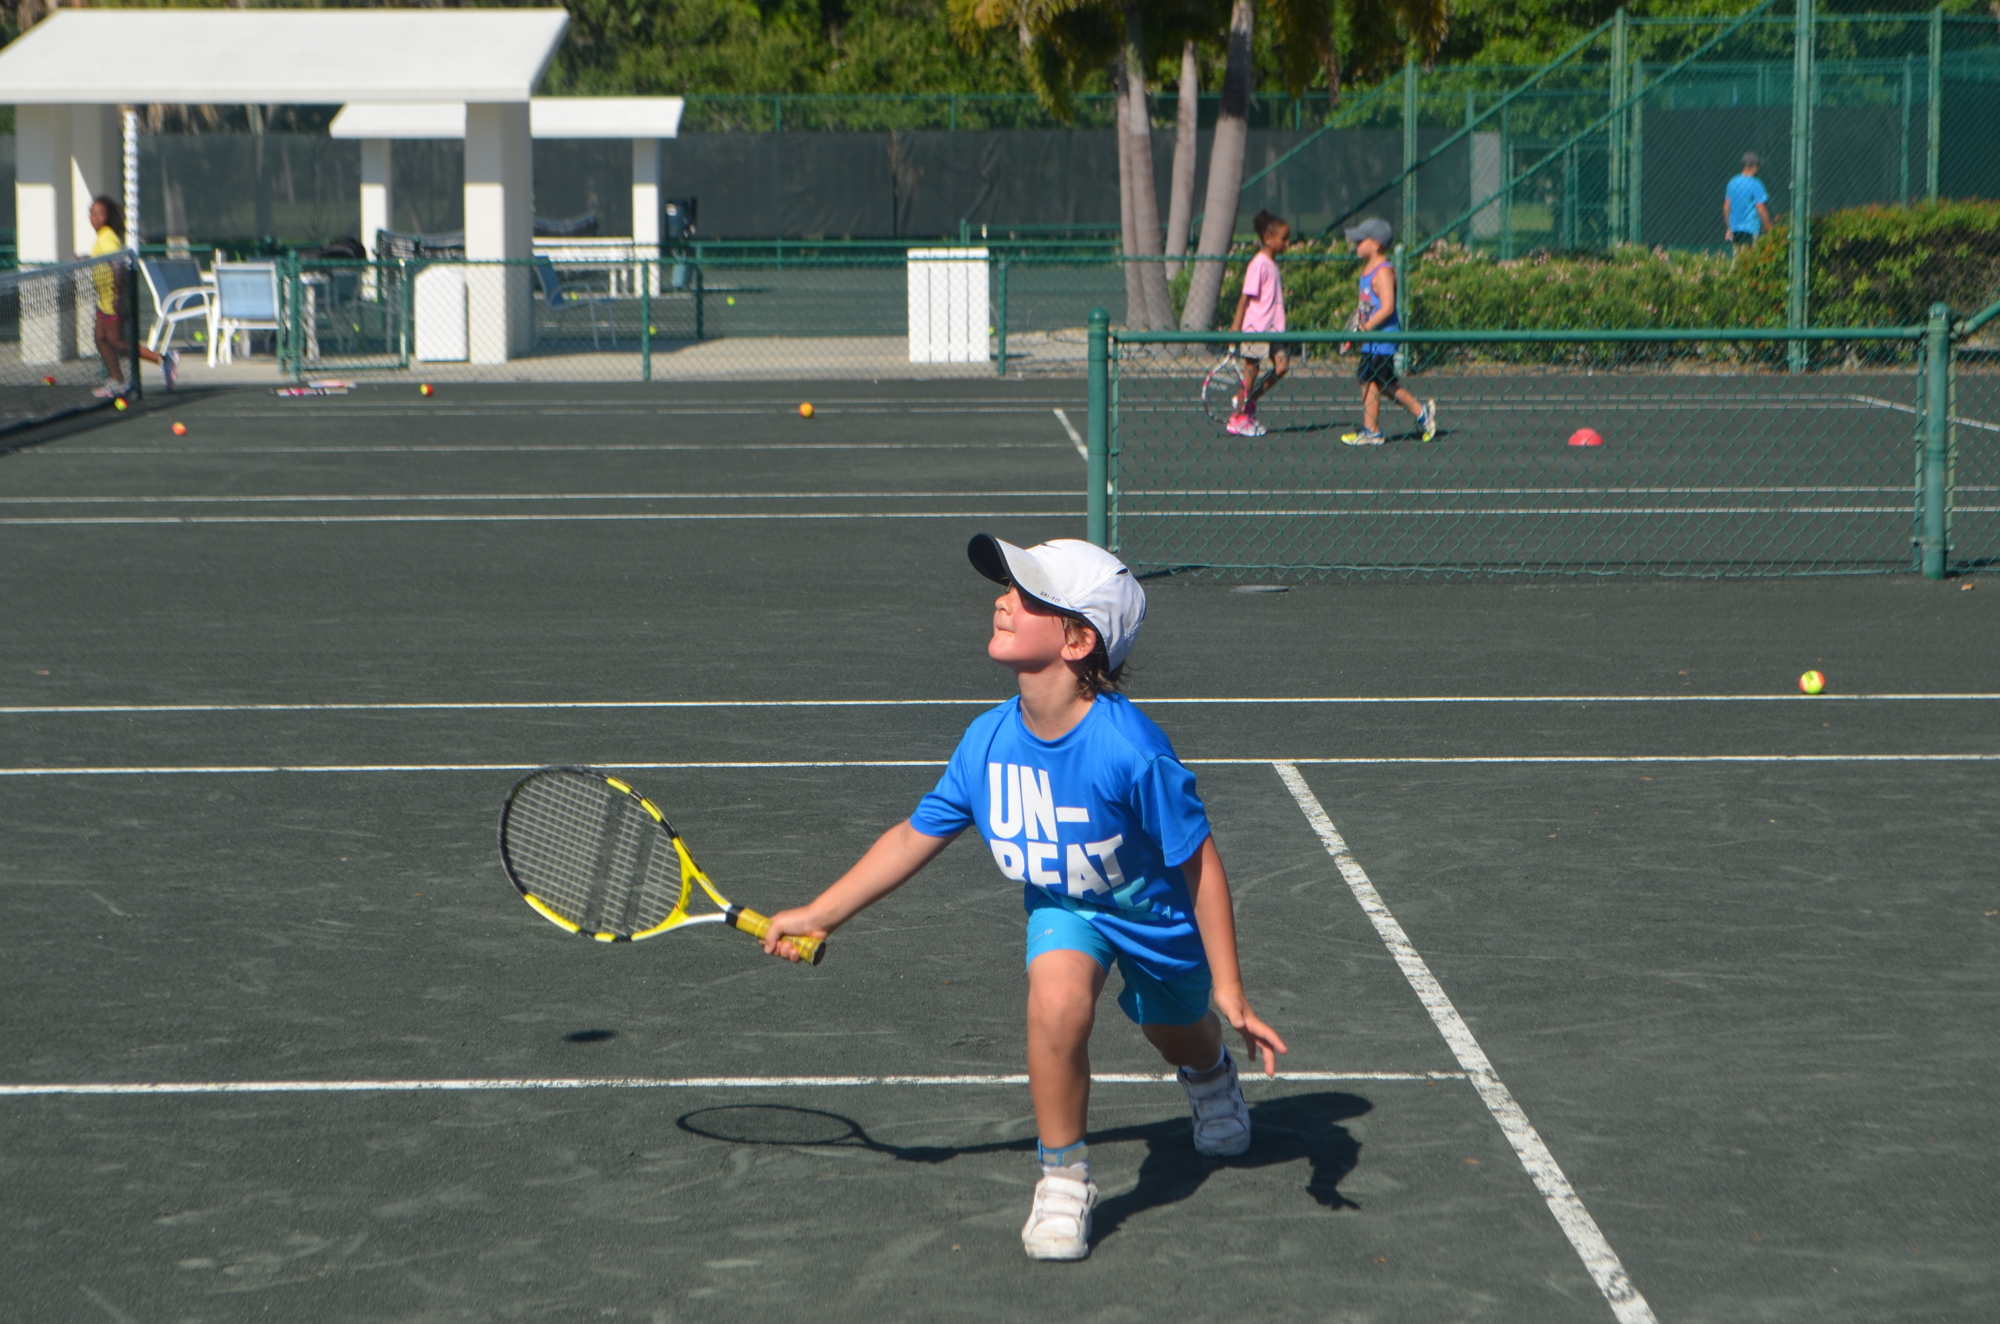 Roman Tahar, on vacation from France, waits to hit the ball at last year's tennis camp.